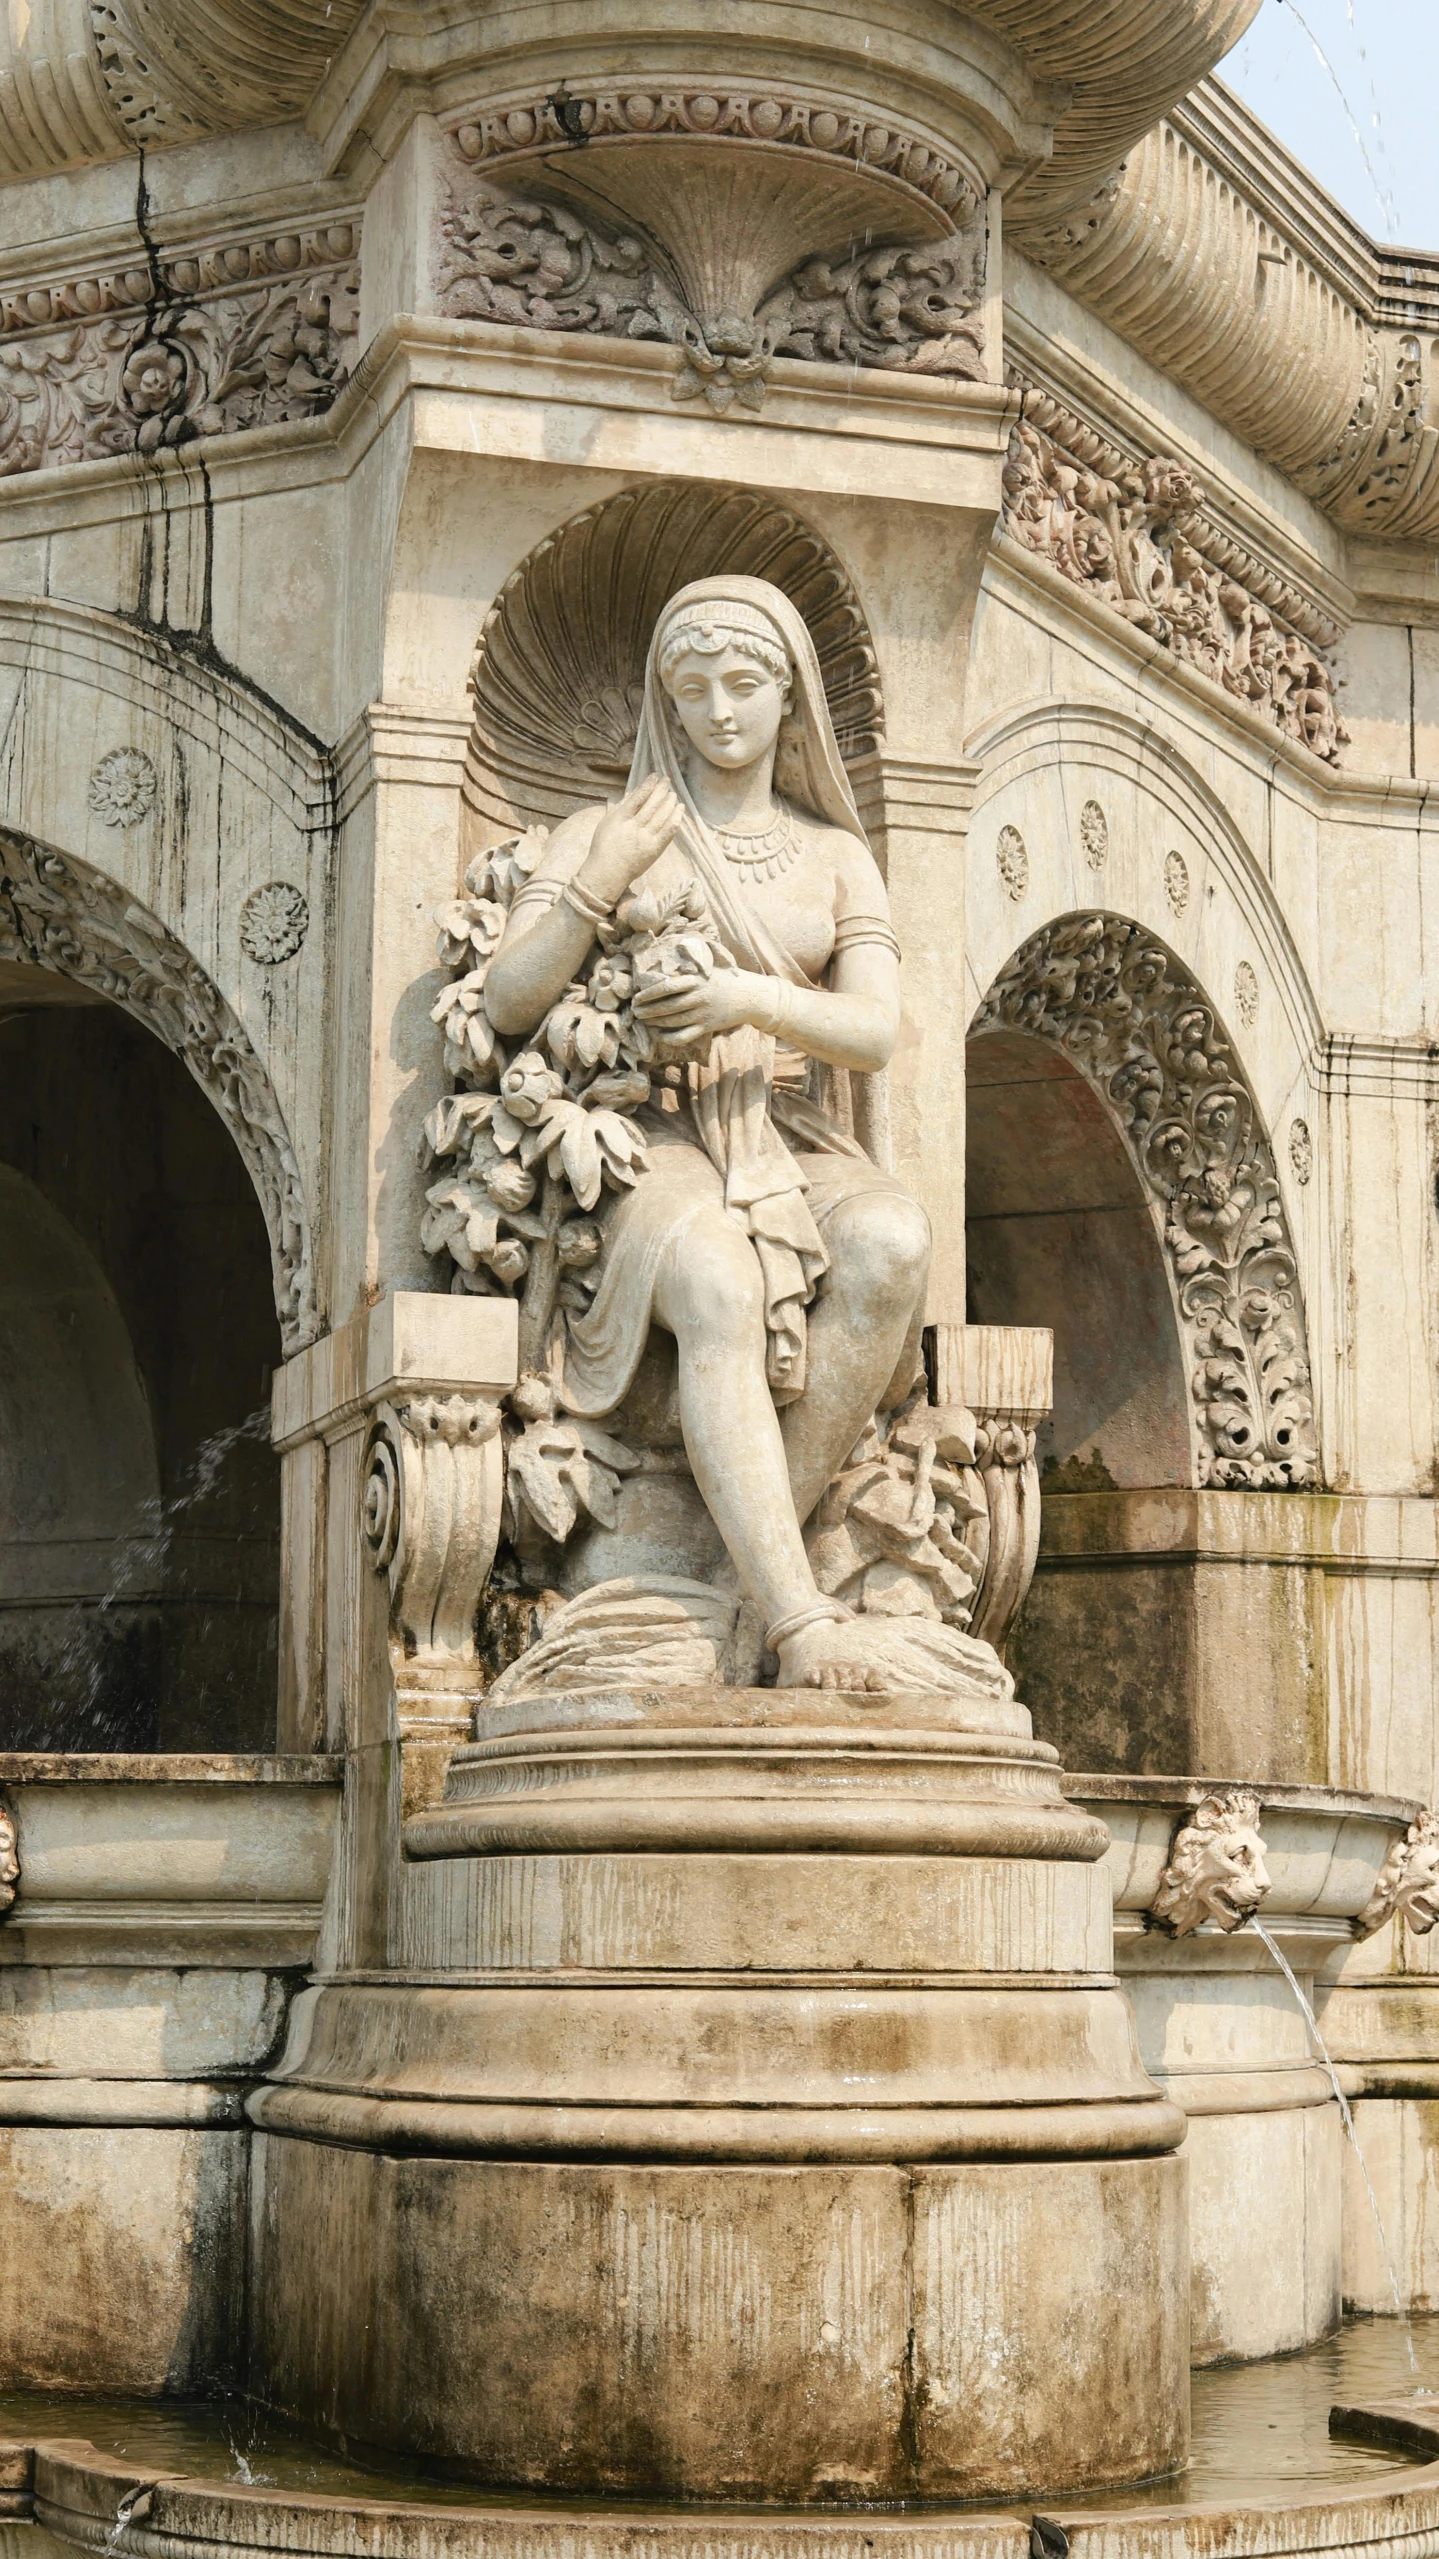 statue of lady with flowers and vase in front of ornate building